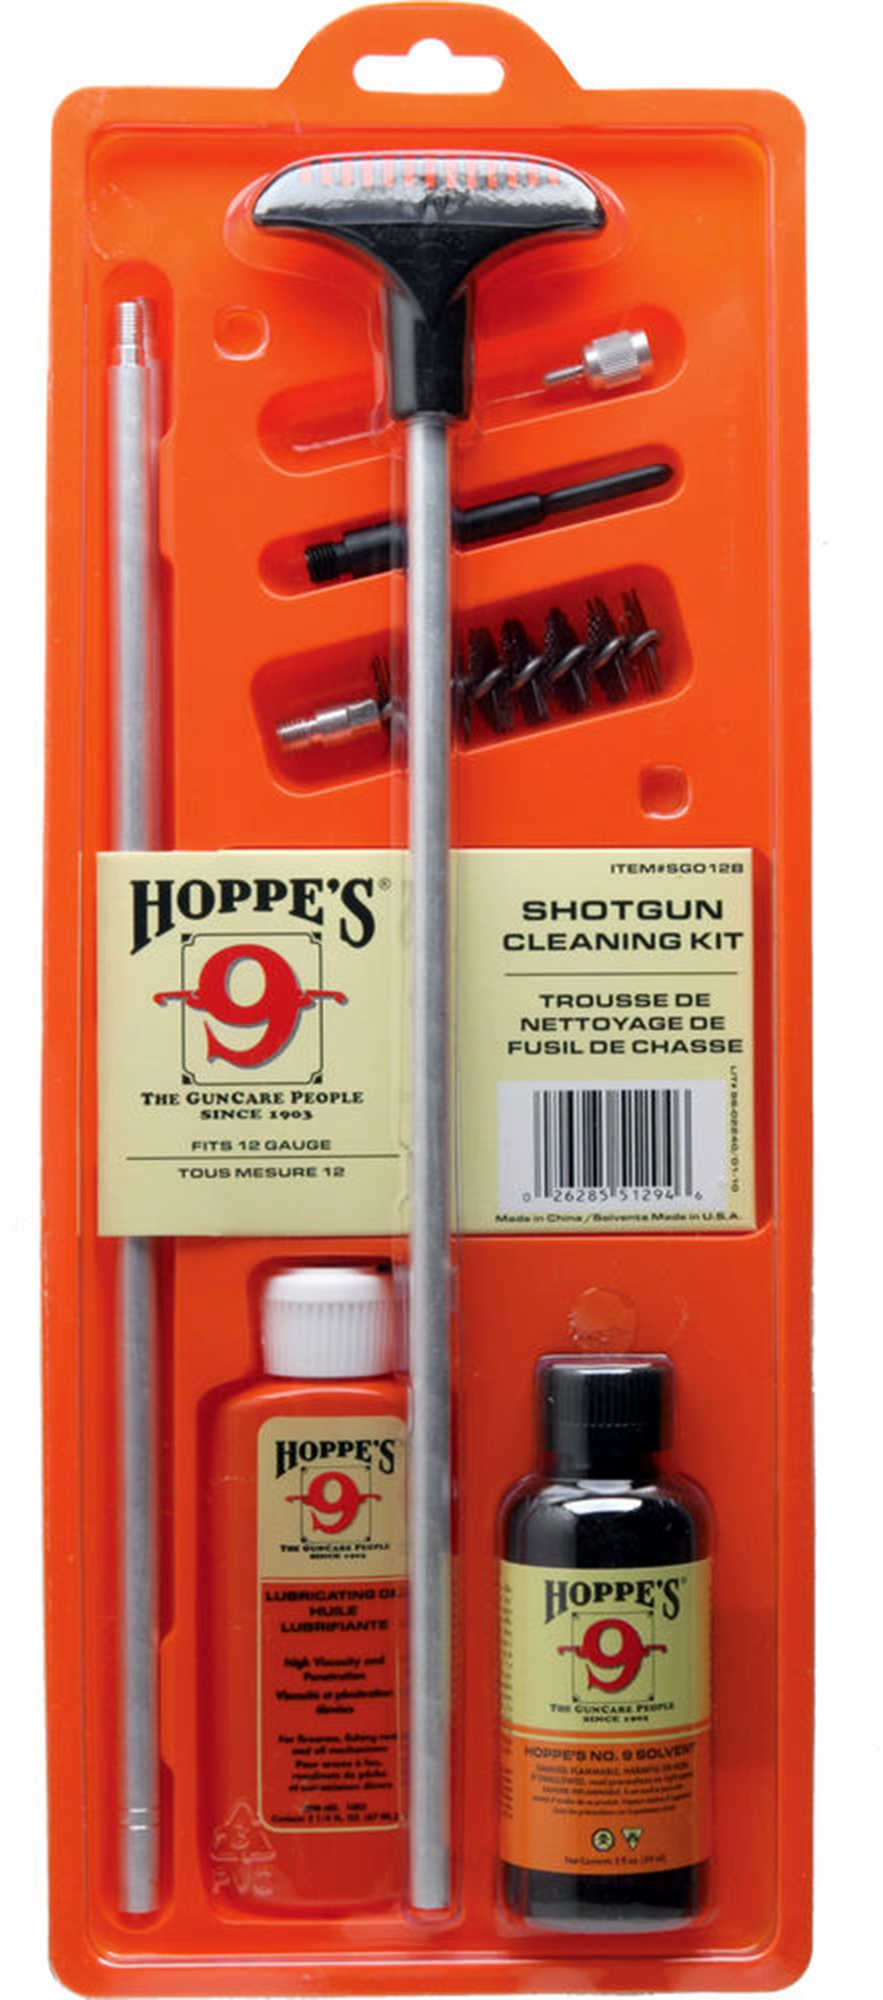 Hoppes 12 Gauge Clamshell Pack Cleaning Kit Md: SGO12B